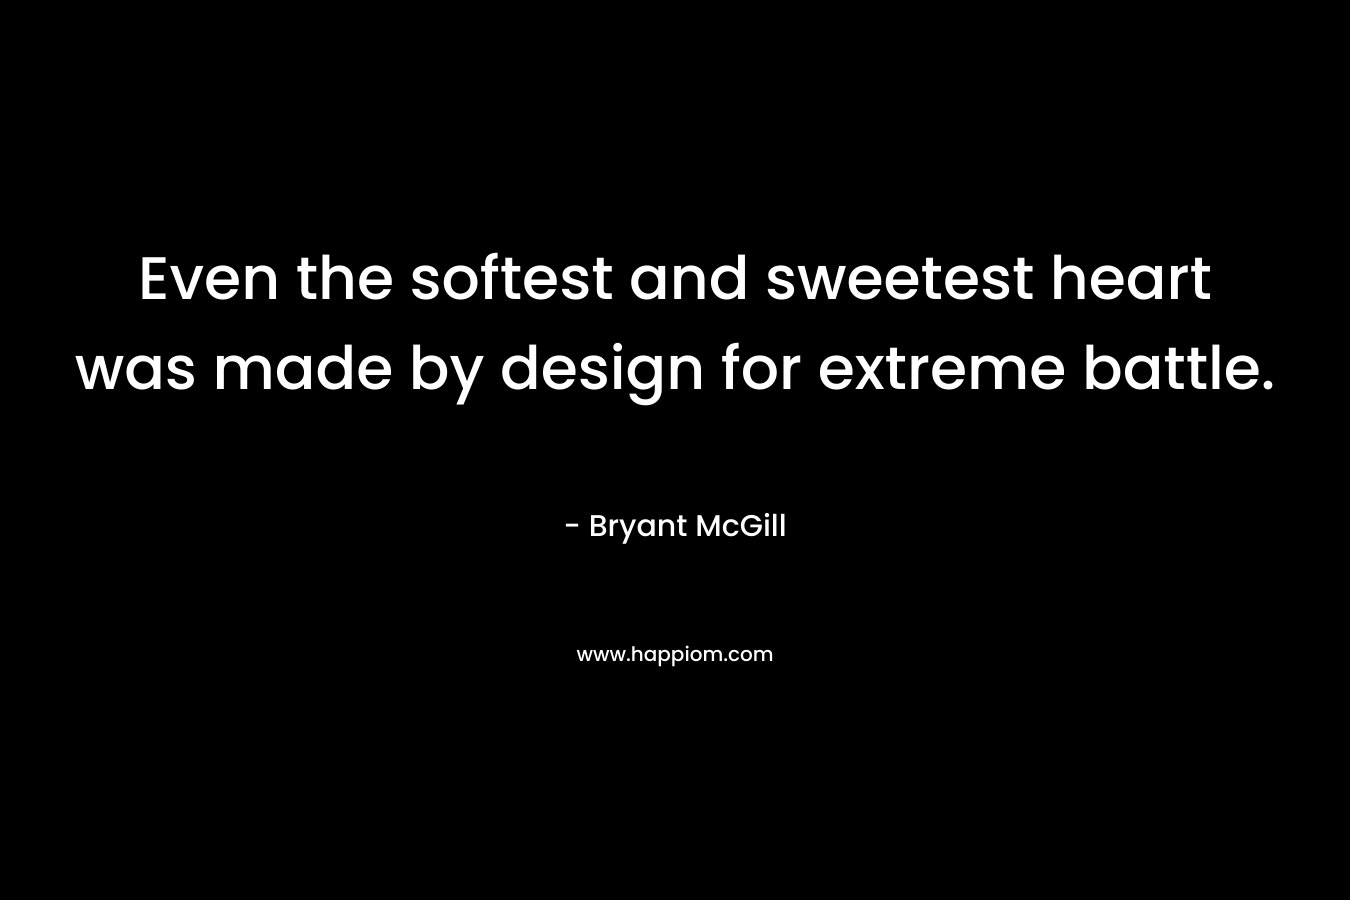 Even the softest and sweetest heart was made by design for extreme battle. – Bryant McGill